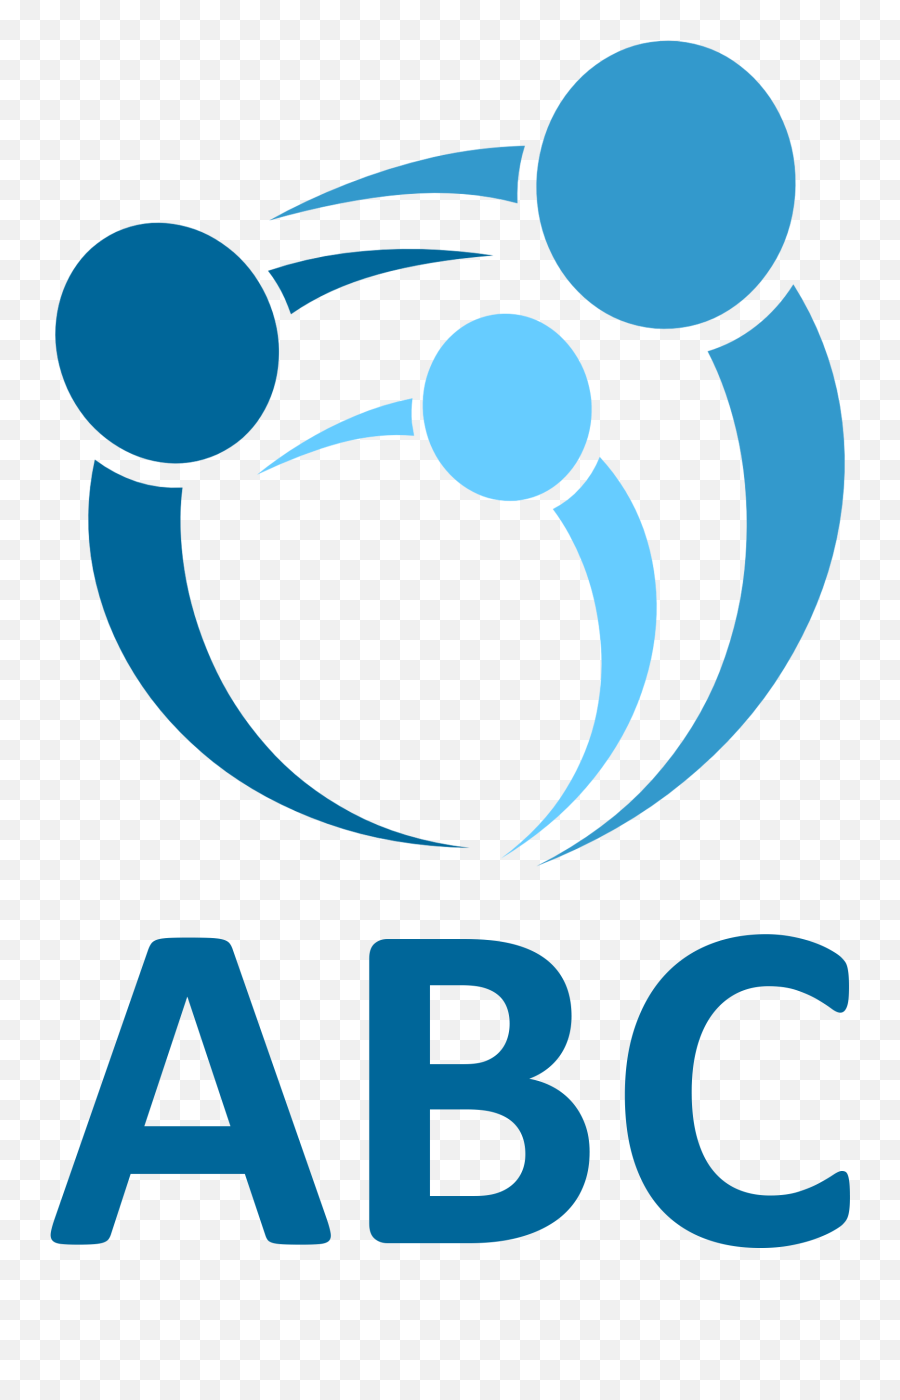 Abc Logo - United Tours U0026 Travel Canada Ltd Full Size Png Special Education Needs Support,Abc Logo Png